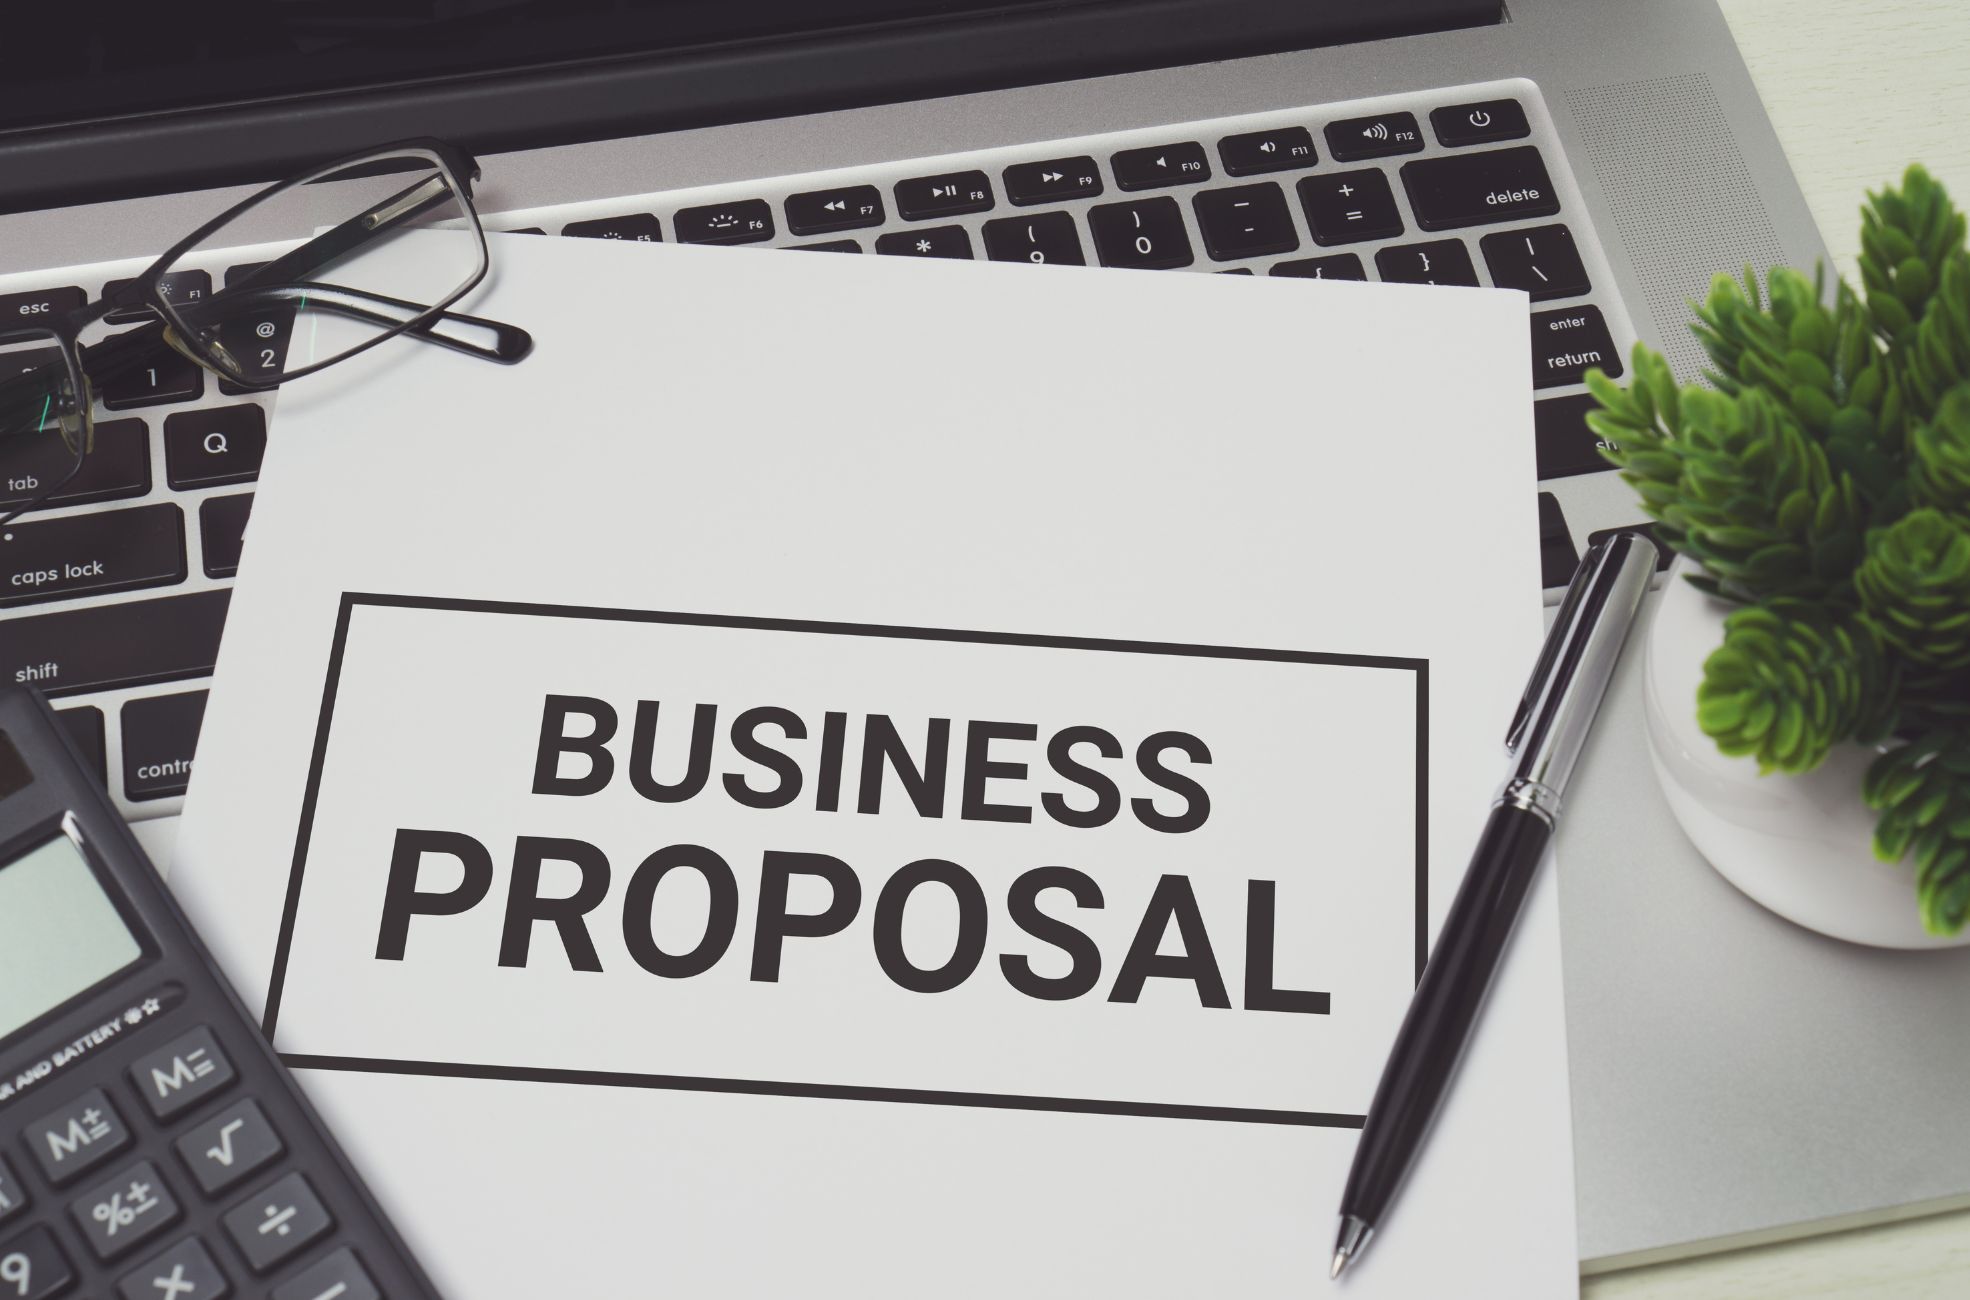 Document Titled Business Proposal On Laptop